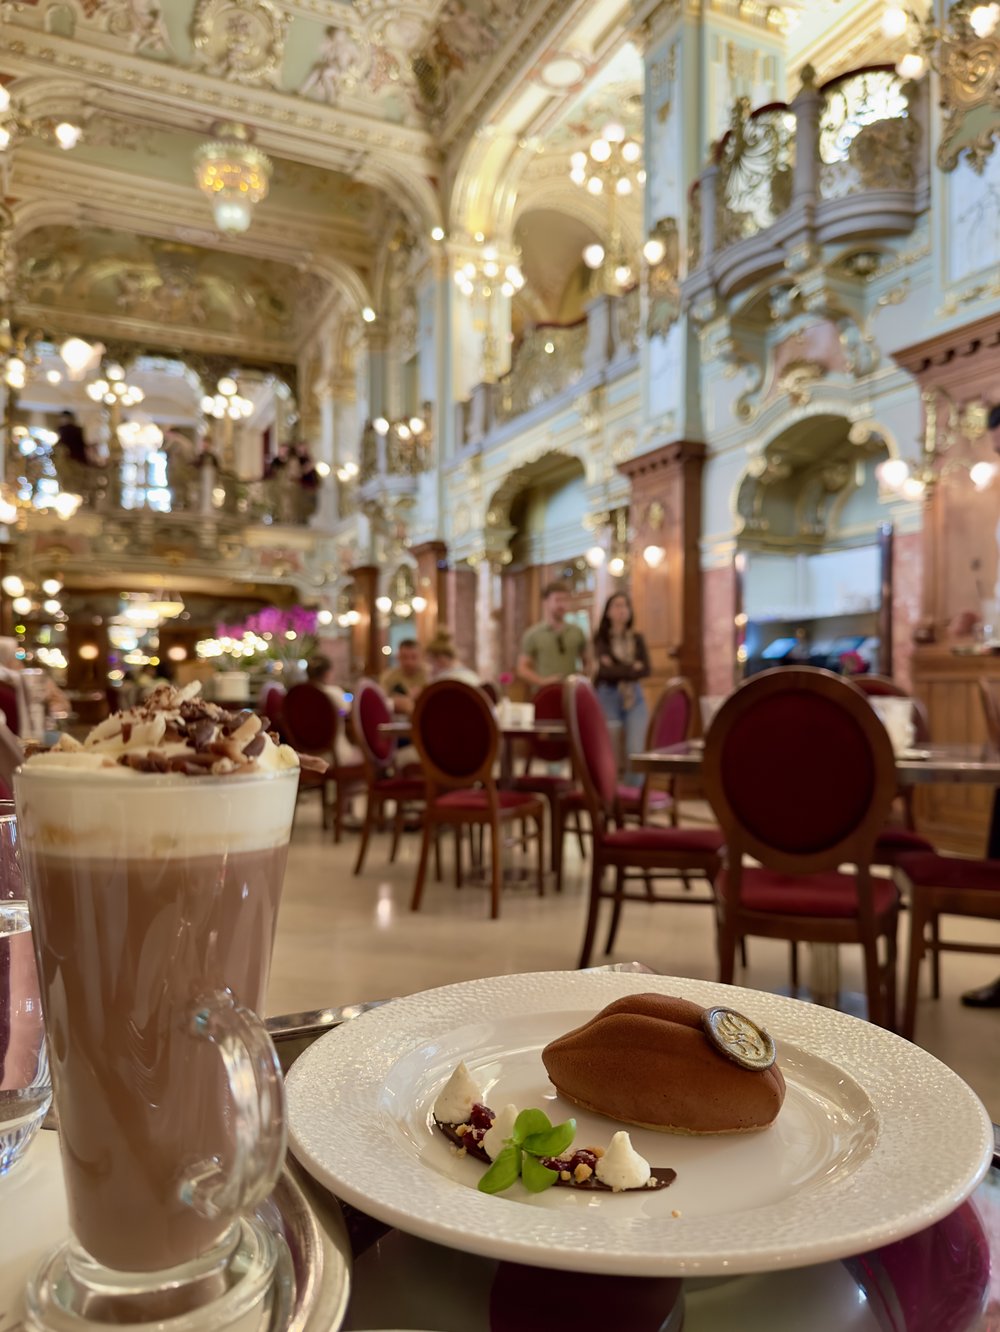 The 'most beautiful cafe in the world'.